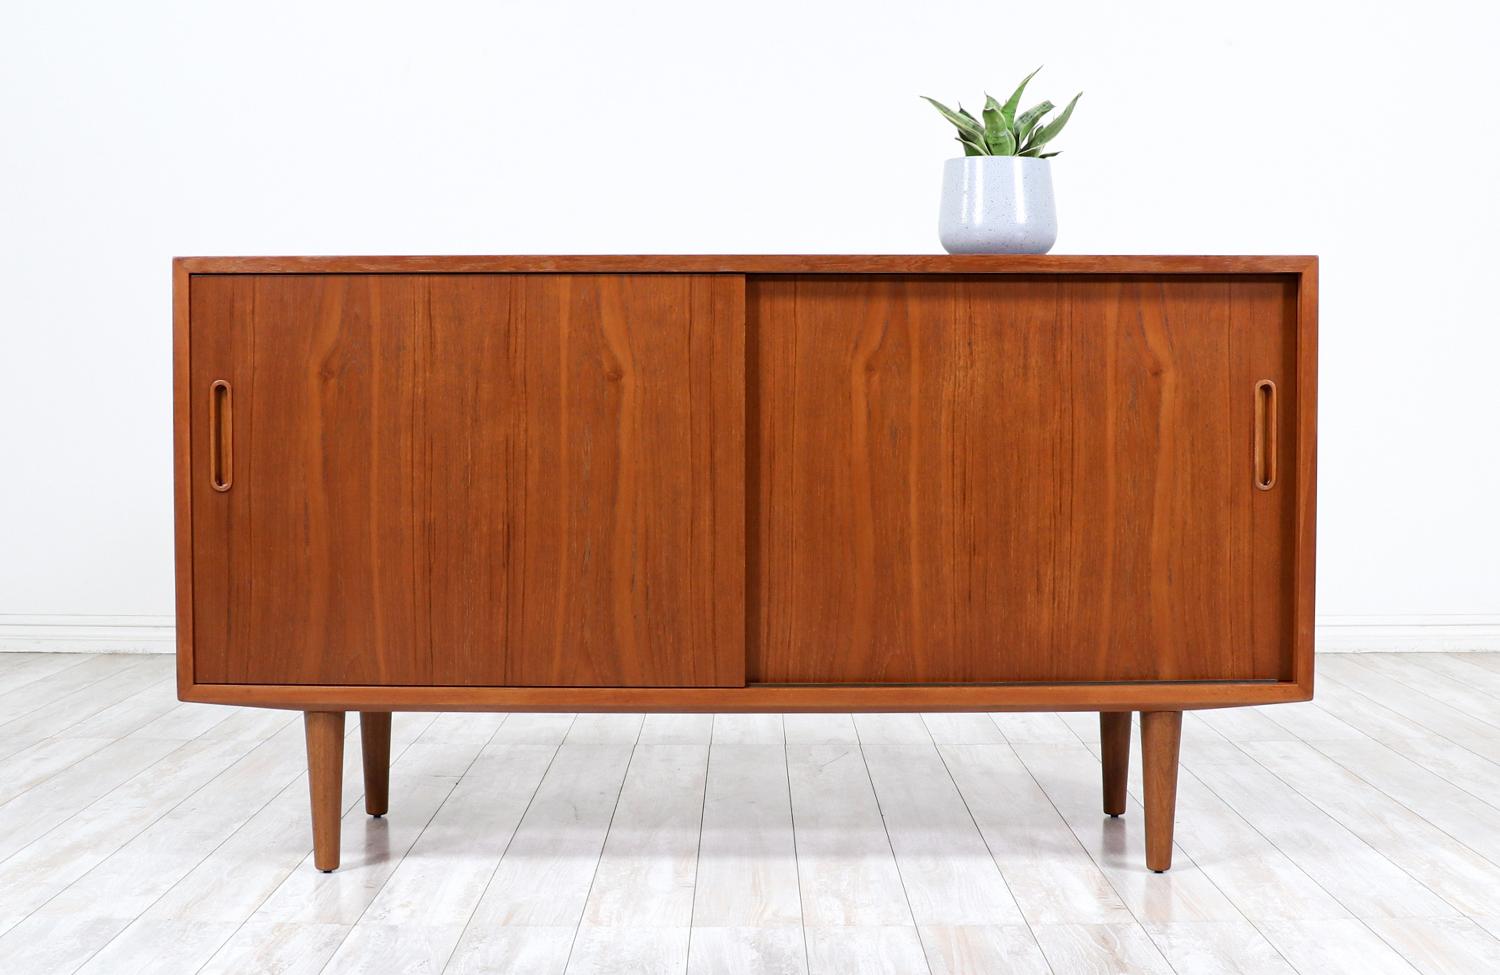 Compact Danish Modern credenza designed by Carlo Jensen for Hundevad Co. in Denmark circa 1960s. This compact credenza features a solid teak wood case with a birch wood interior and two doors that open smoothly revealing ample storage space. The